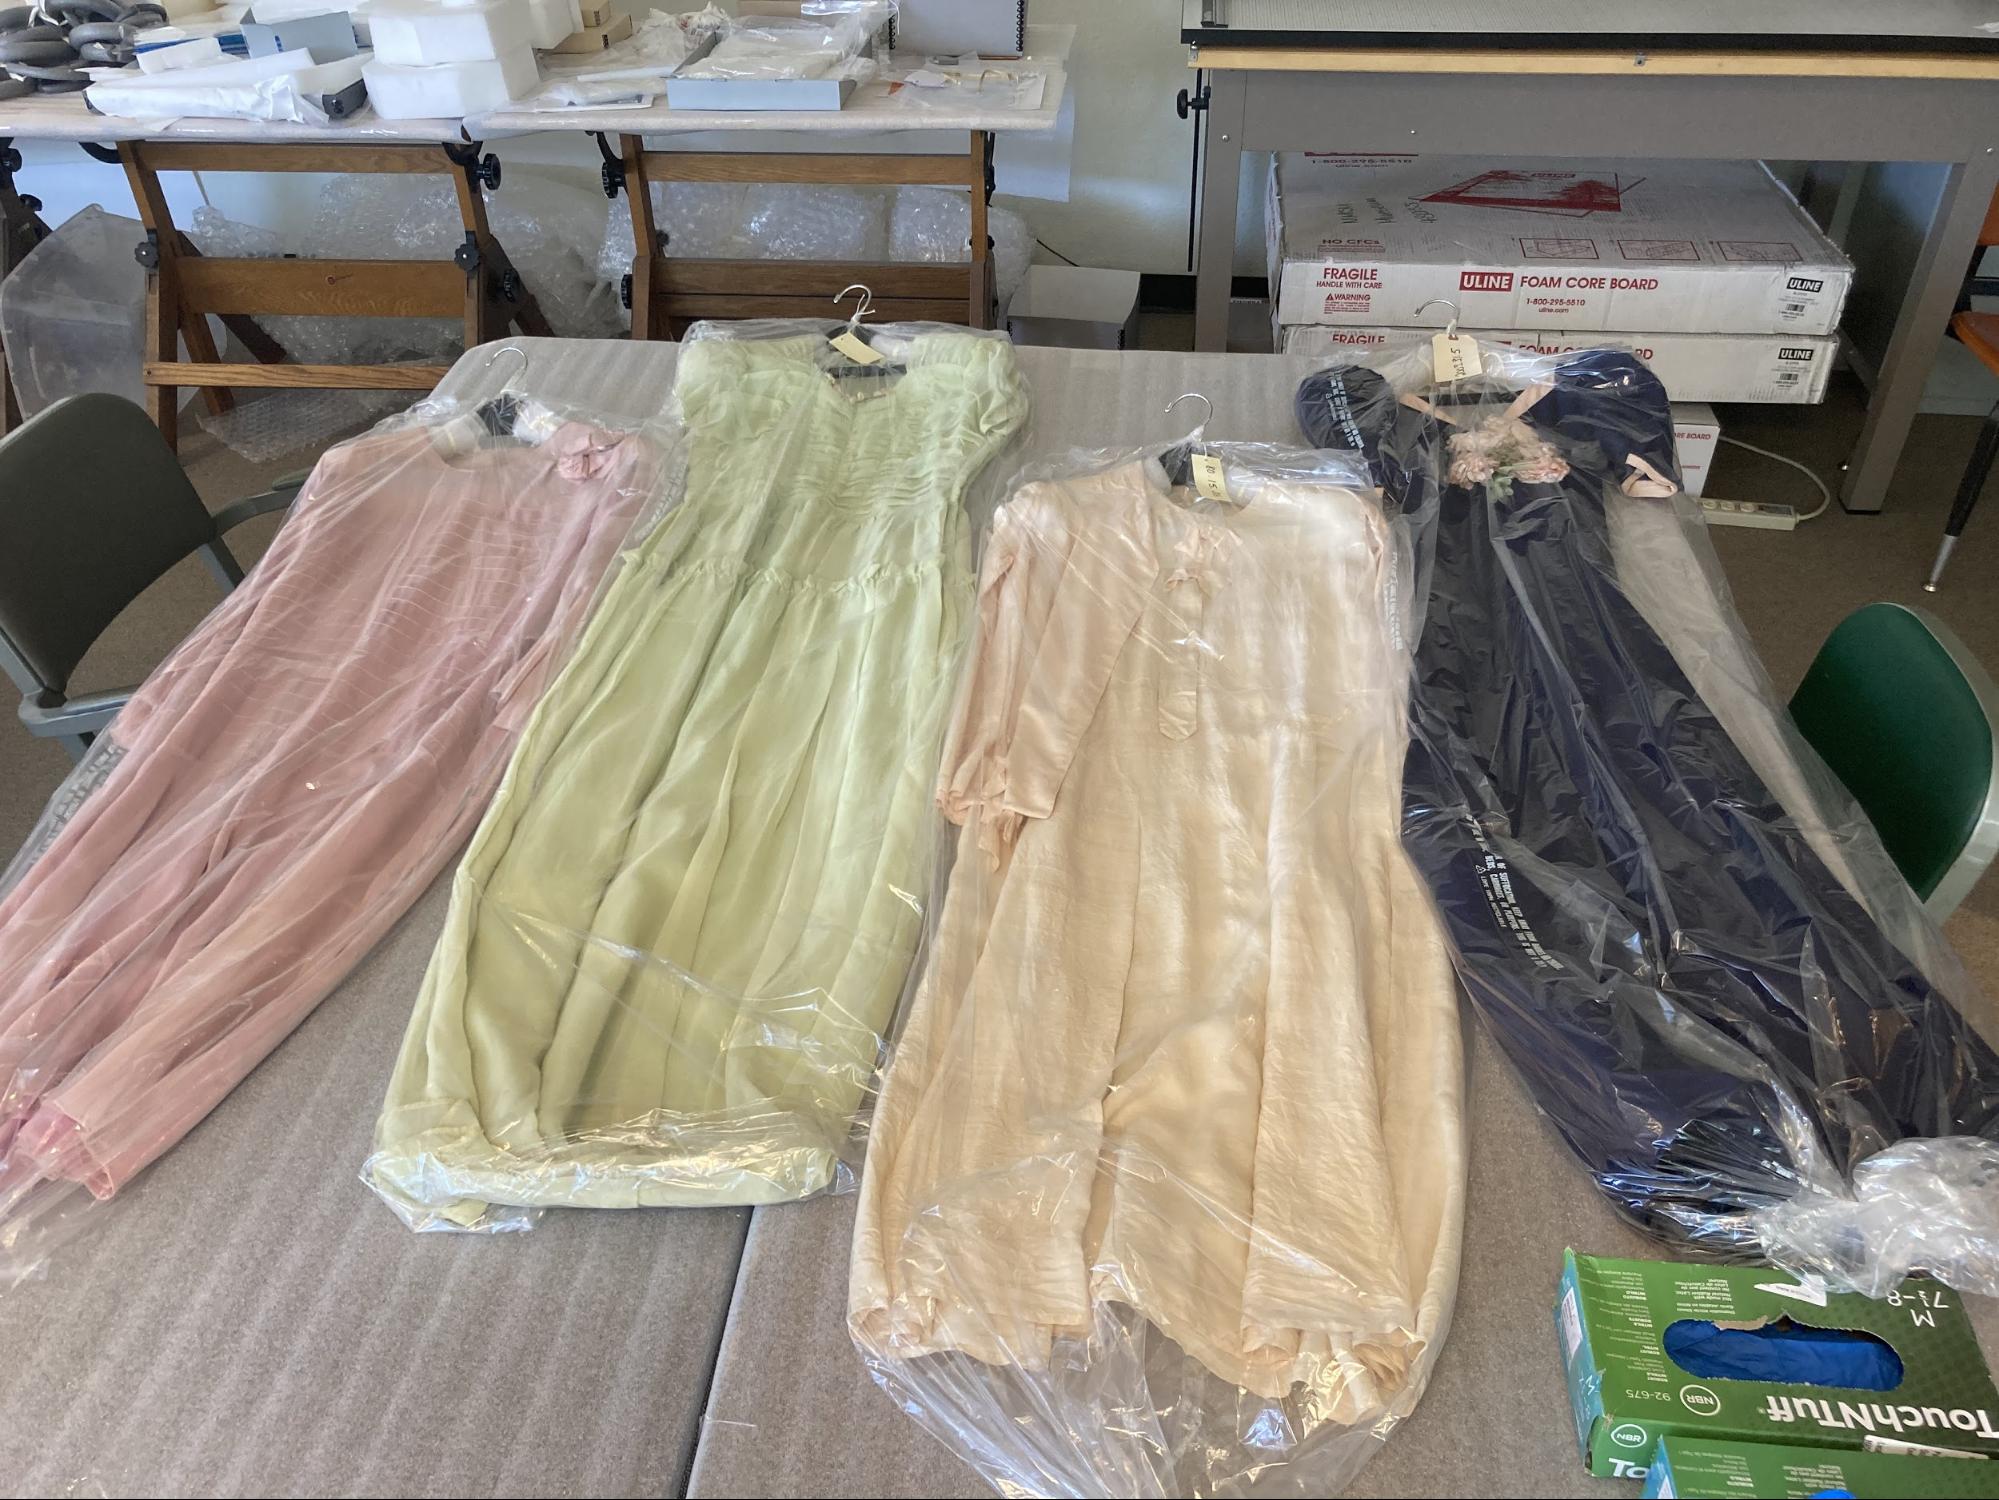 A Collection of Dresses from the 1920s-30s waiting to be inventoried and photographed